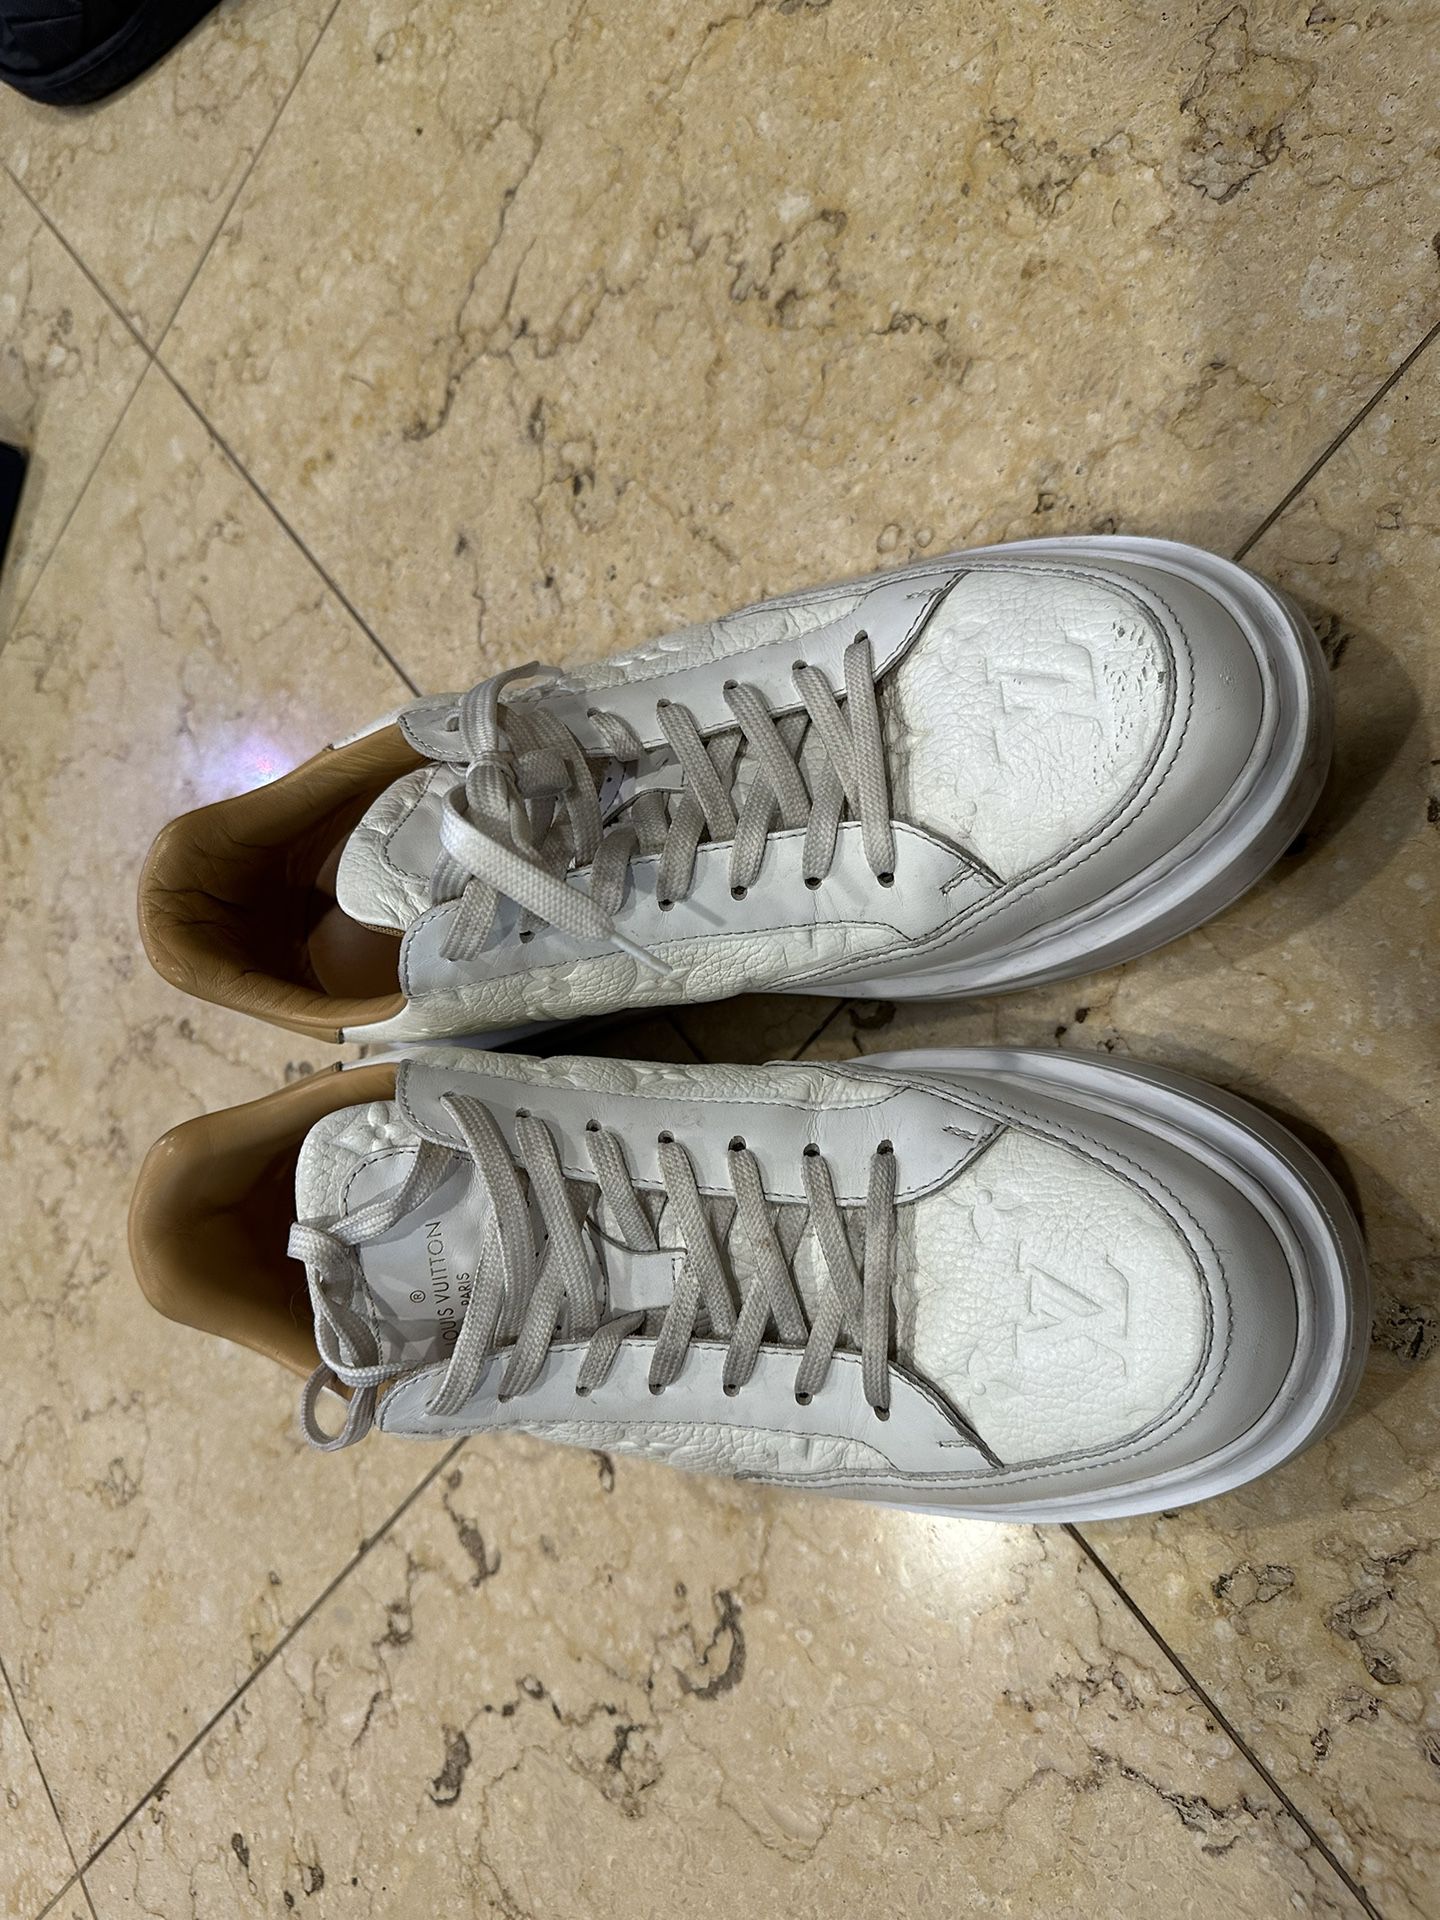 Louis Vuitton BEVERLY HILLS SNEAKER 100% Authentic for Sale in Los